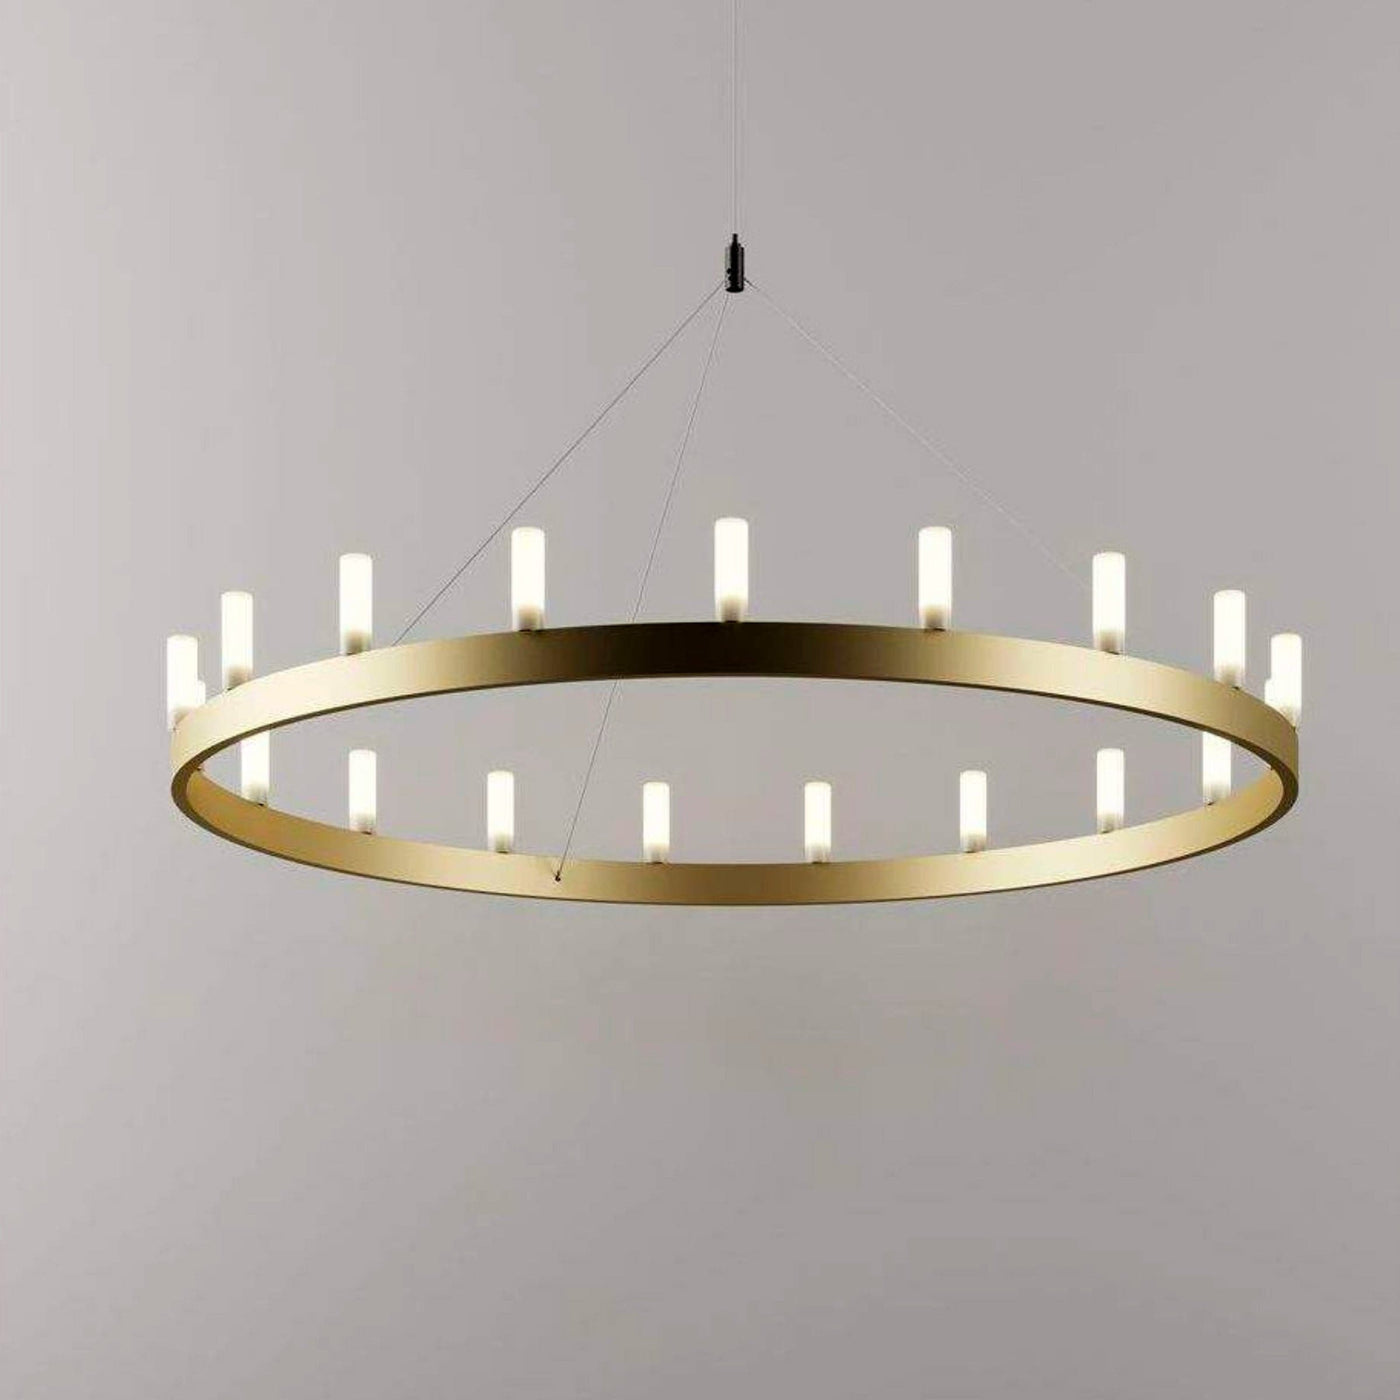 Suspension Lamp CHANDELIER Small Gold by David Chipperfield for FontanaArte 01